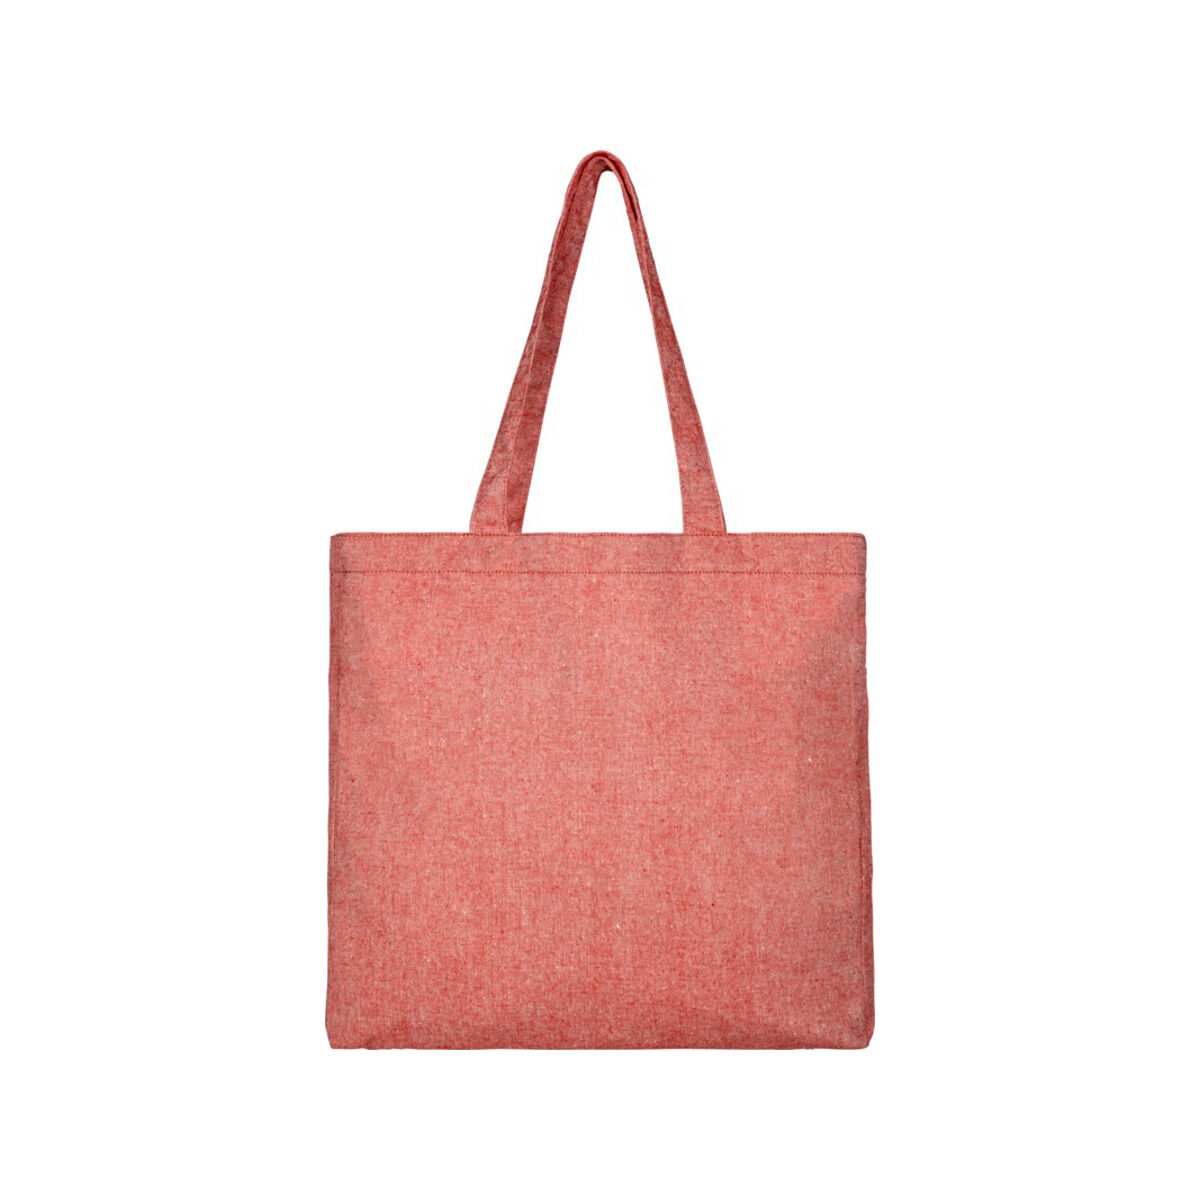 Recycled cotton and polyester shopping bag